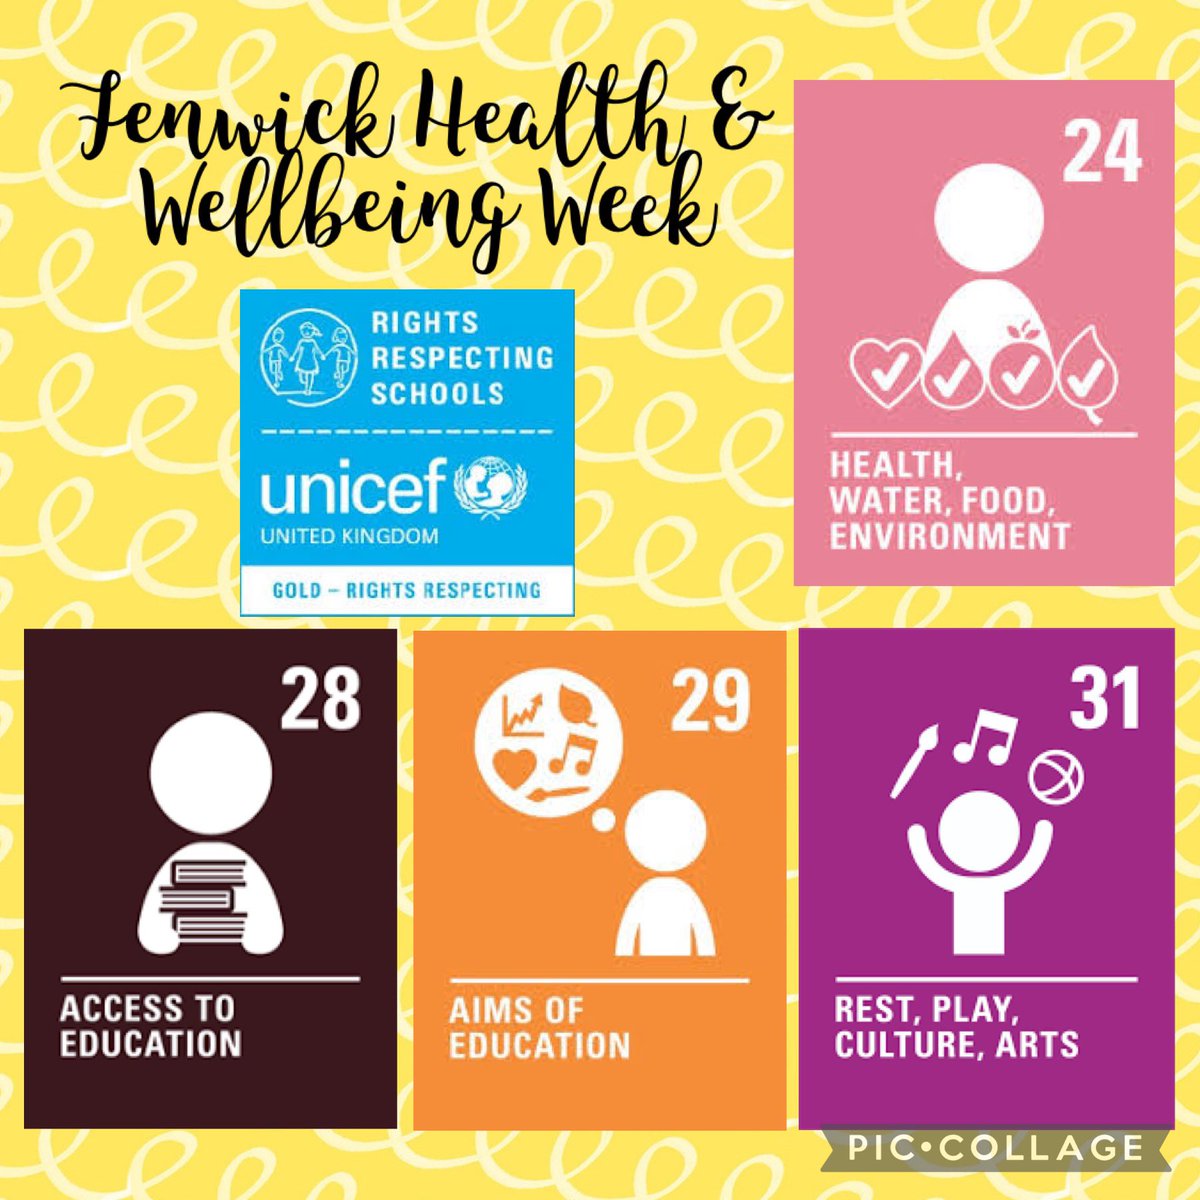 HEALTH & WELLBEING WEEK DAY 2! We were very lucky to have Art Teaching students from @UniWestScotland to work with our P1-3 pupils all day today. They delivered a ‘Making Touch Visible’ workshop for the pupils to get involved in.